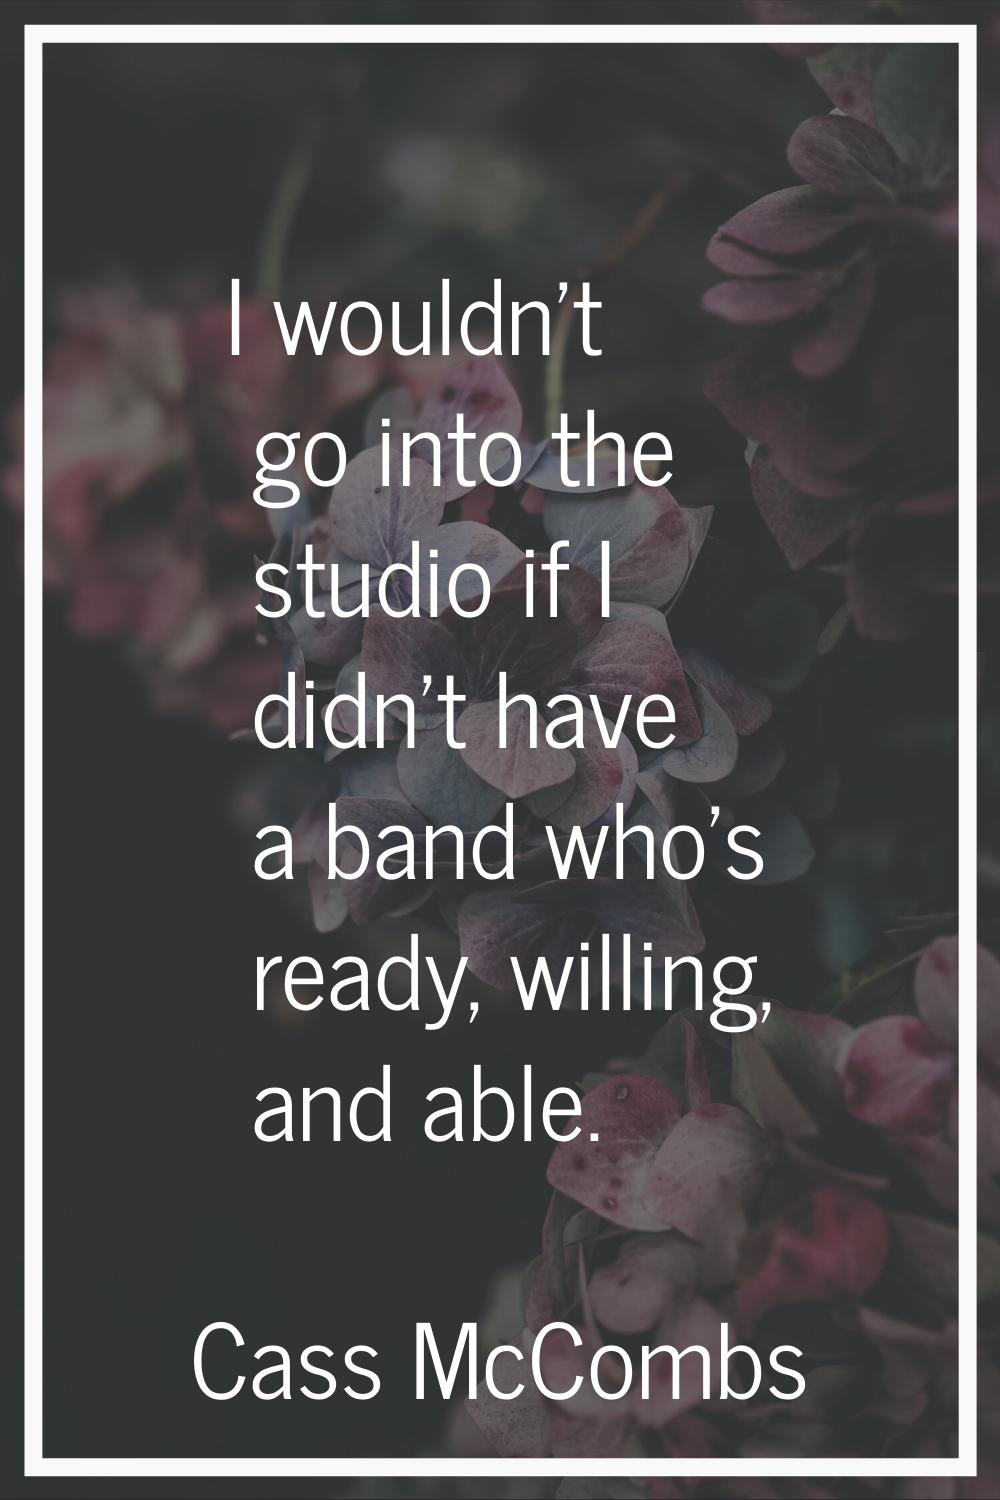 I wouldn't go into the studio if I didn't have a band who's ready, willing, and able.